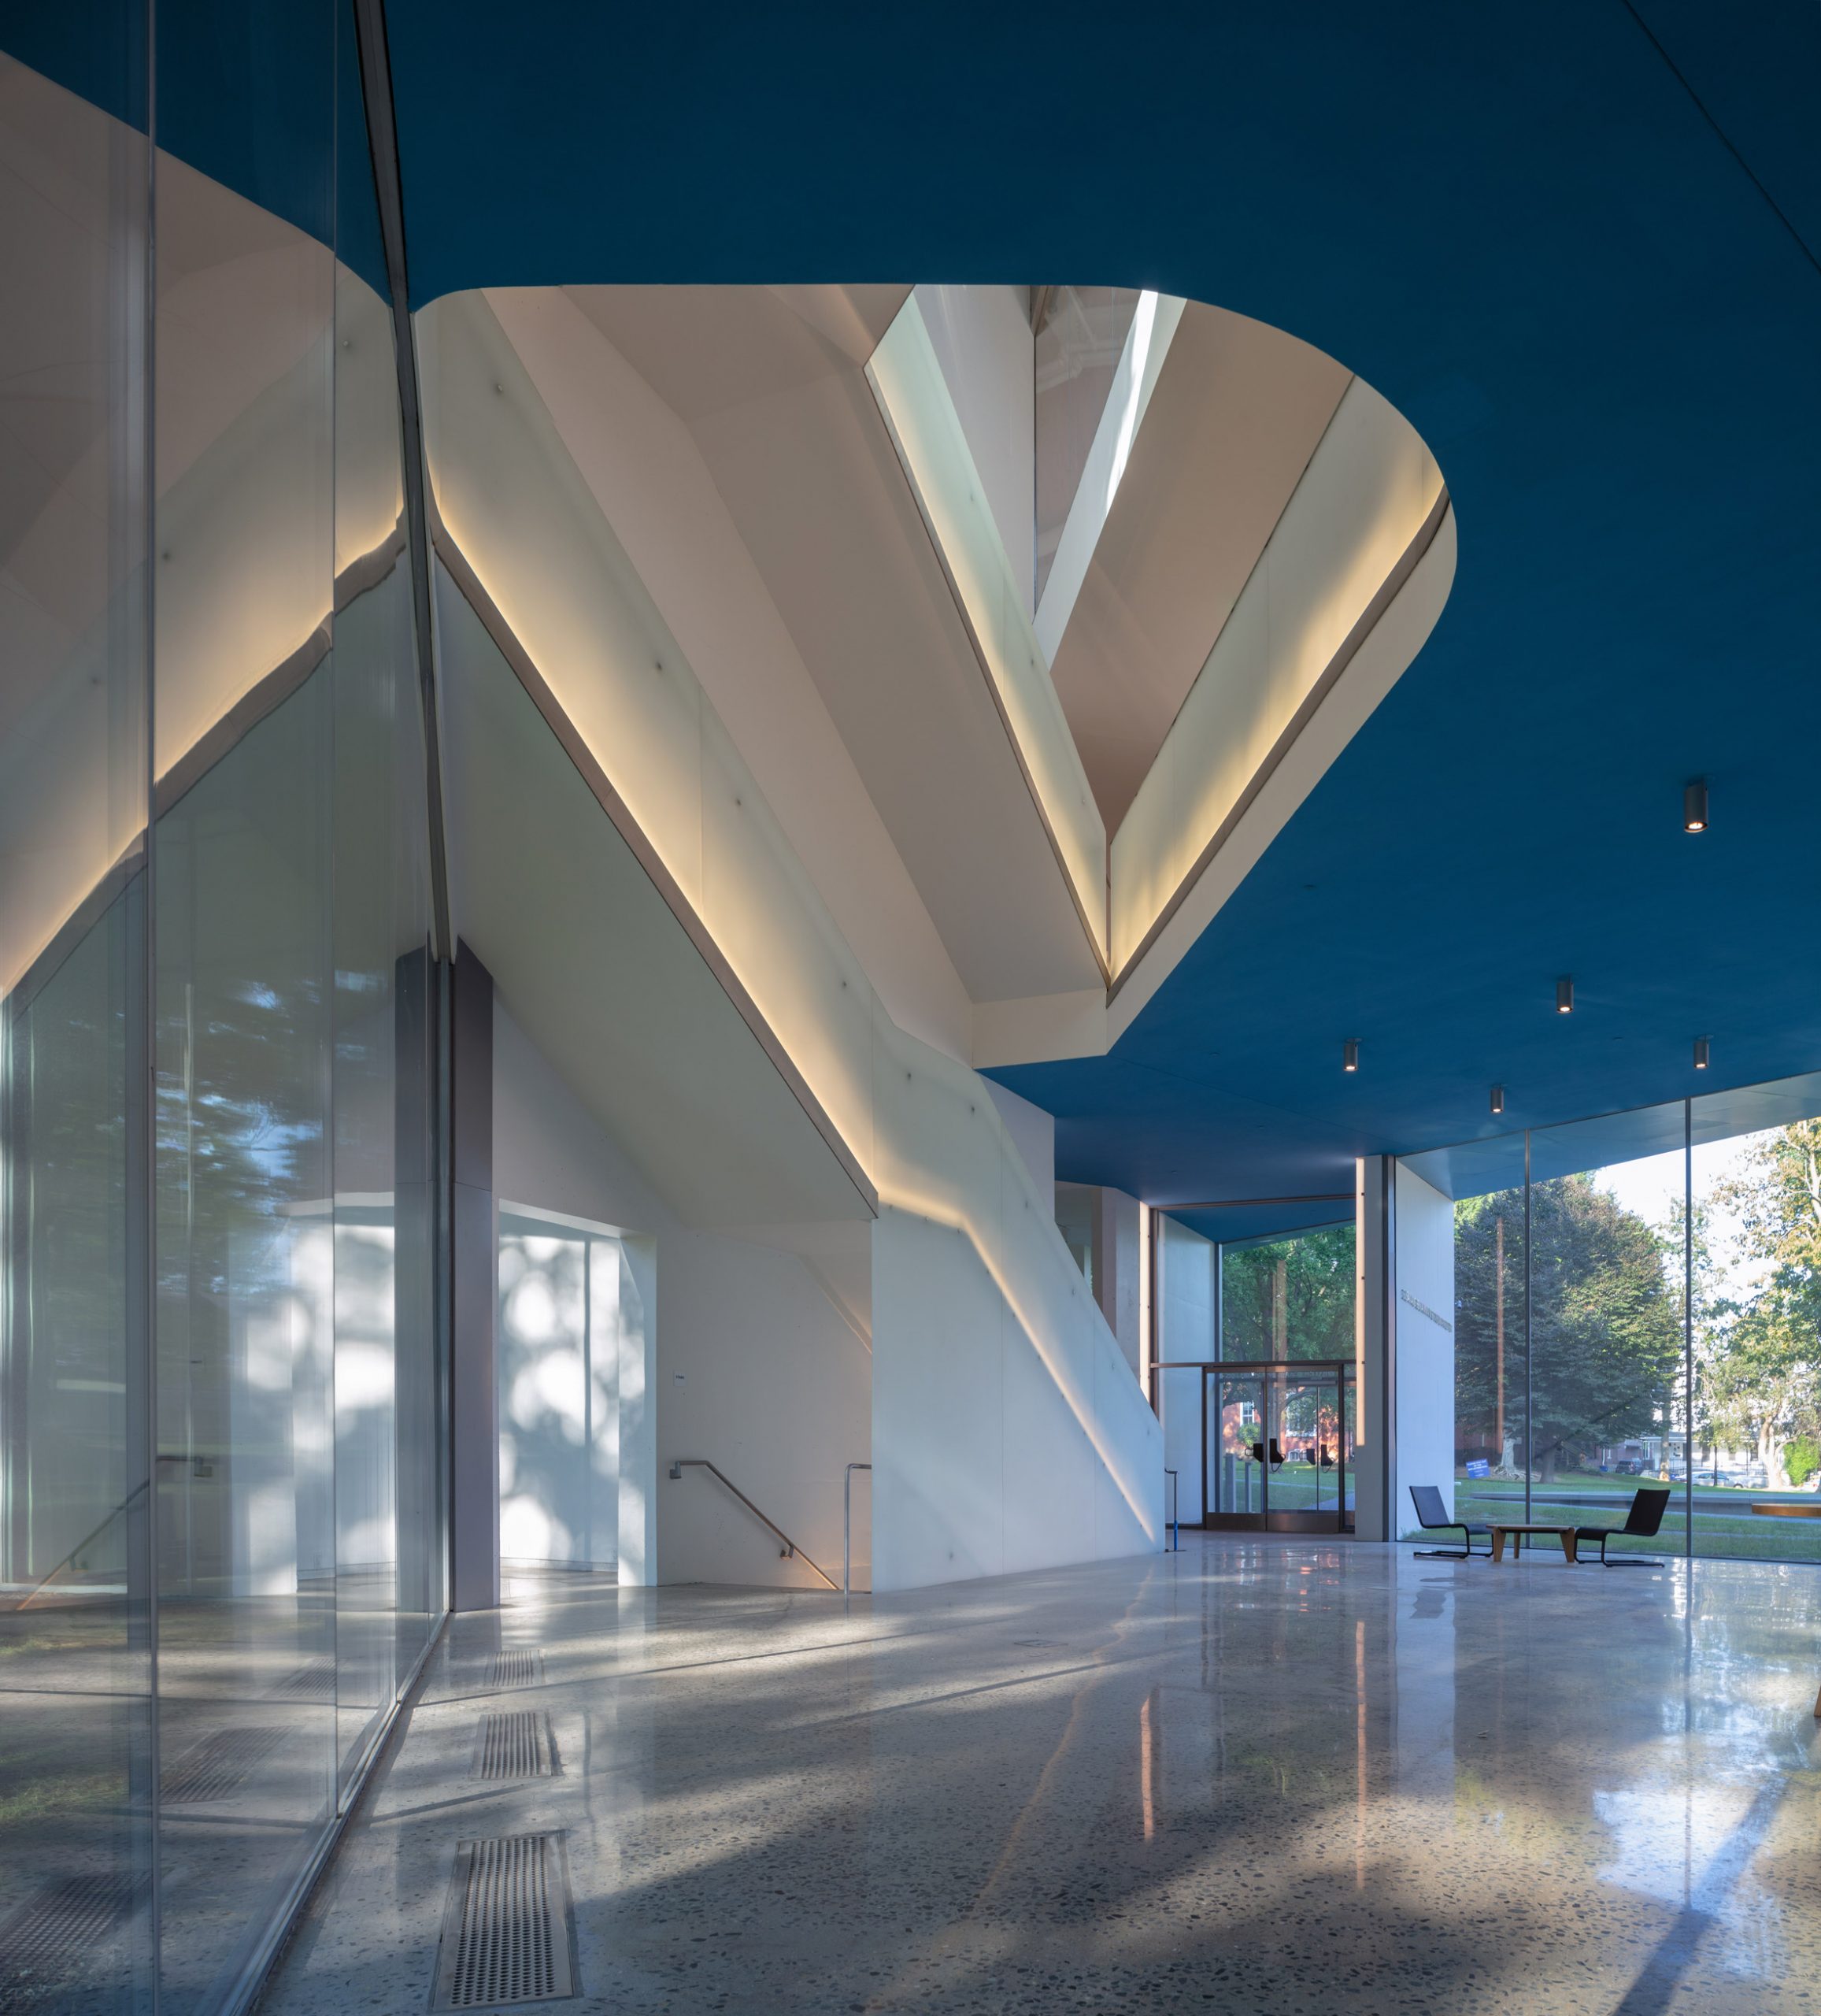 Entrance of Winter Visual Arts Building by Steven Holl Architects in Lancaster, Pennsylvania